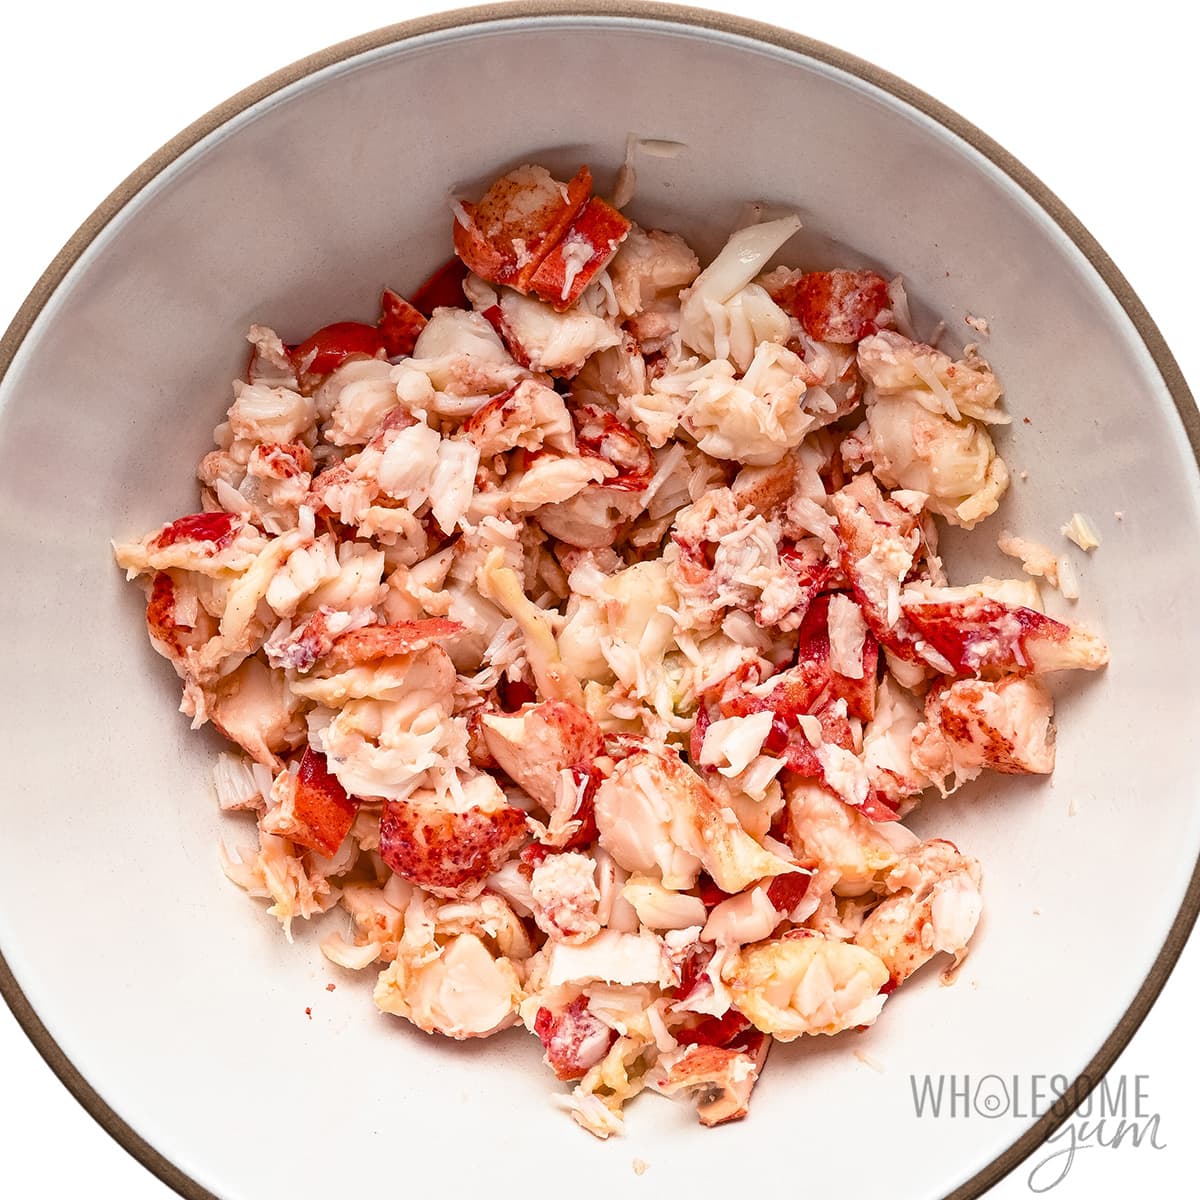 Small chunks of lobster meat in a bowl.